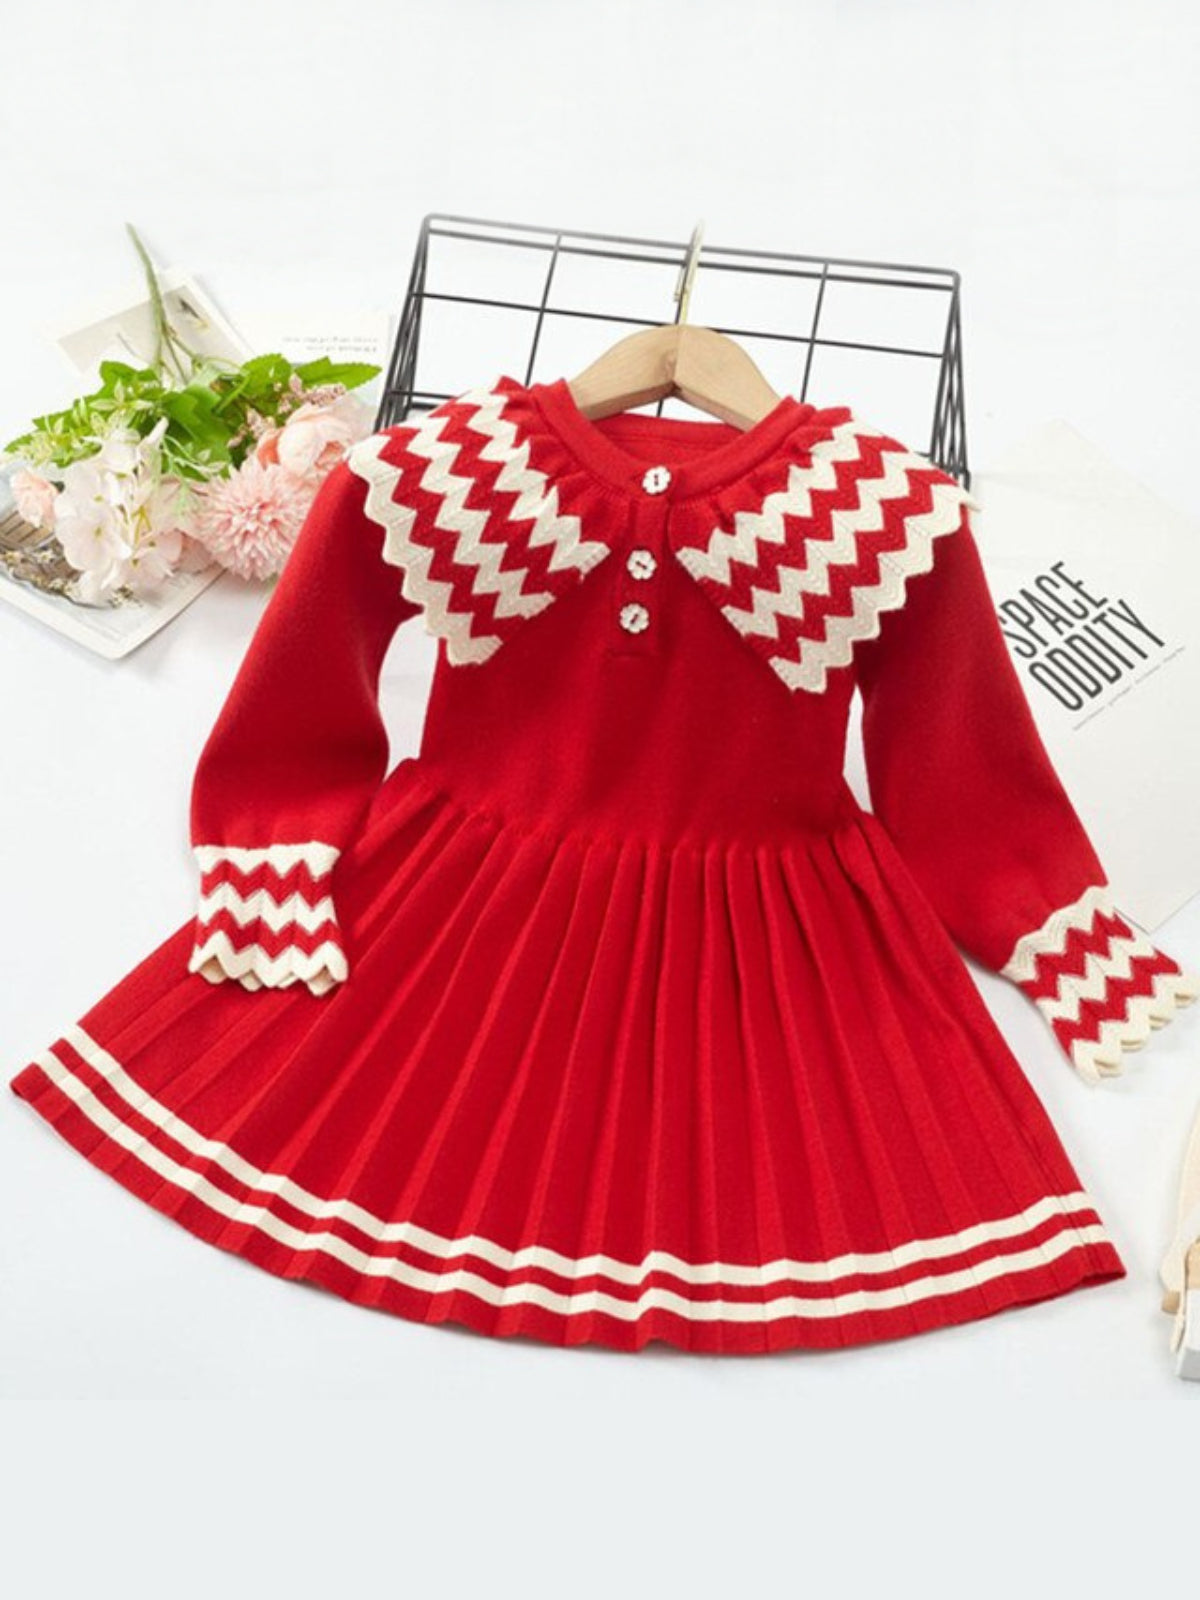 Totally Trending Red Pleated Knit Dress